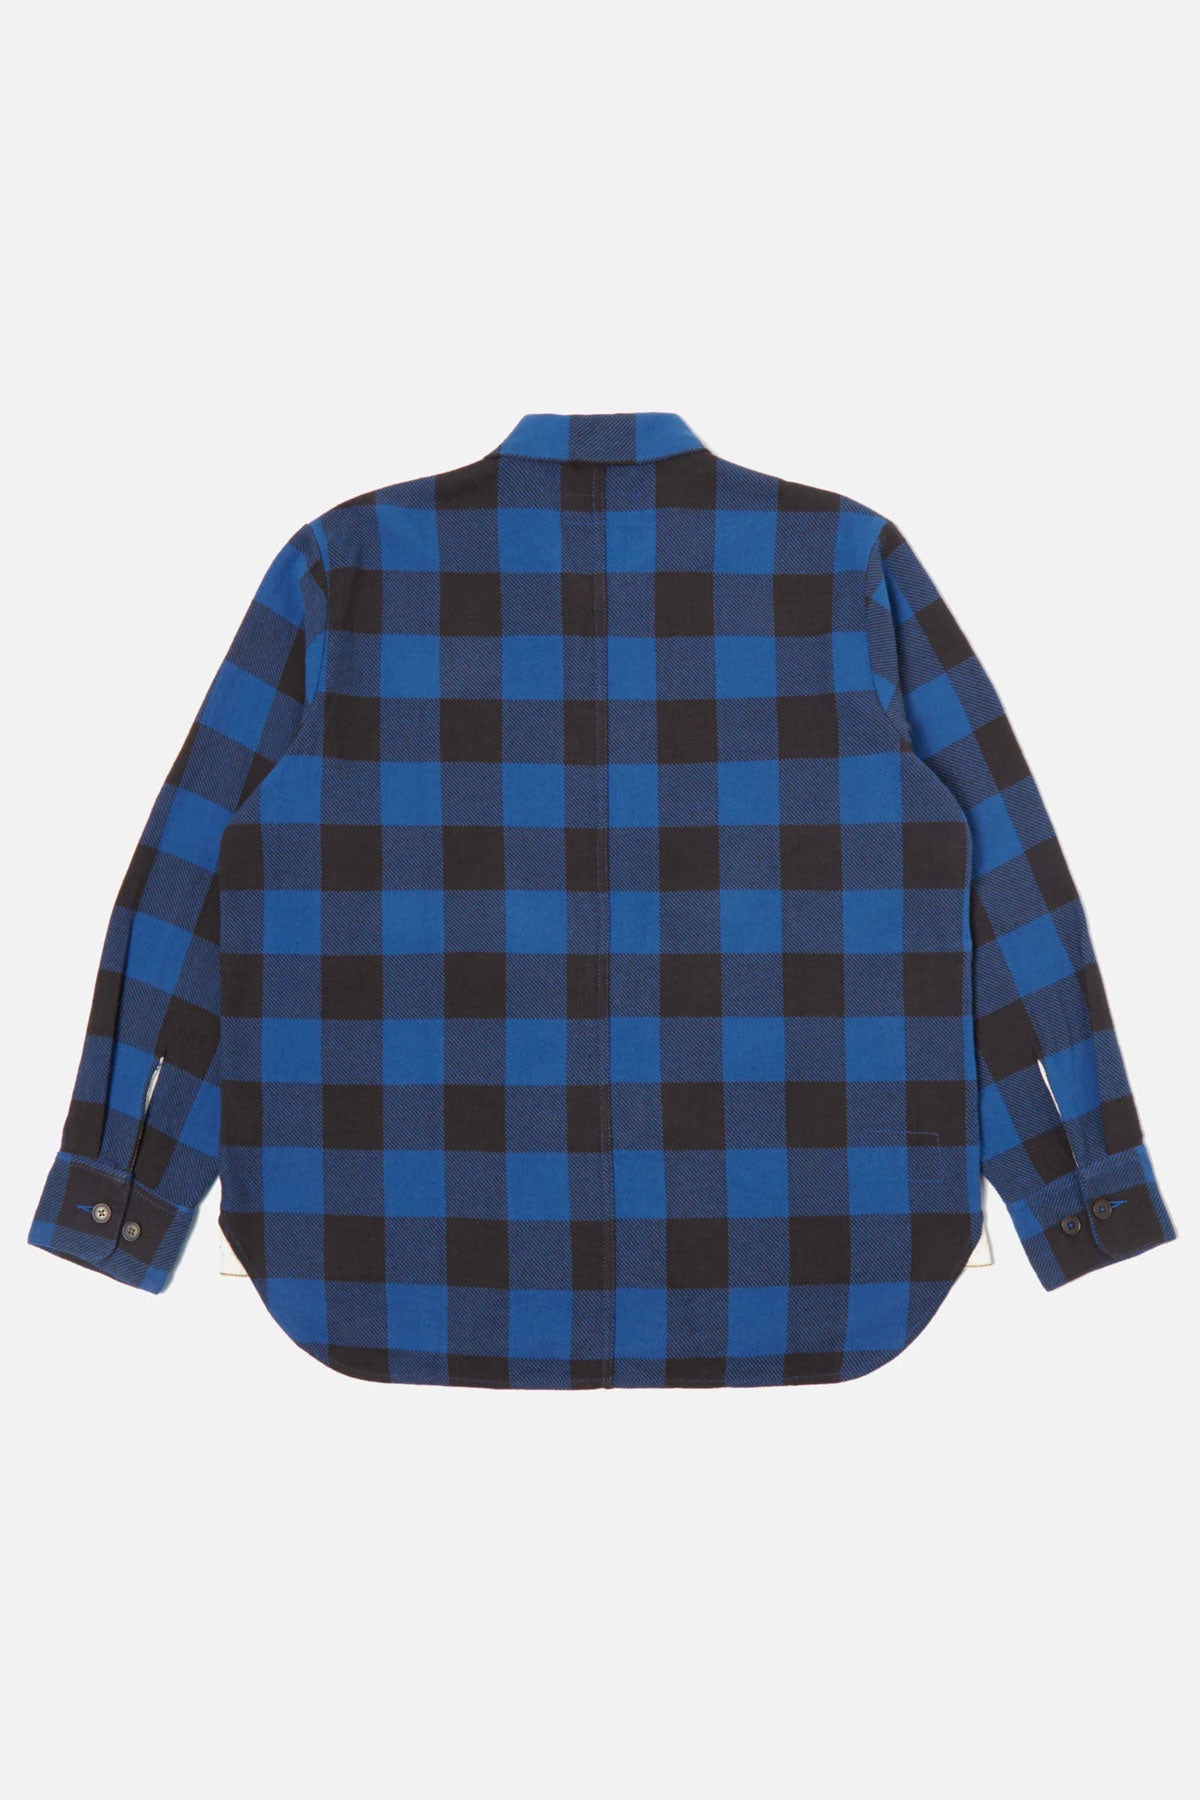 Universal Works - Travail Shirt In Navy Winter Gingham